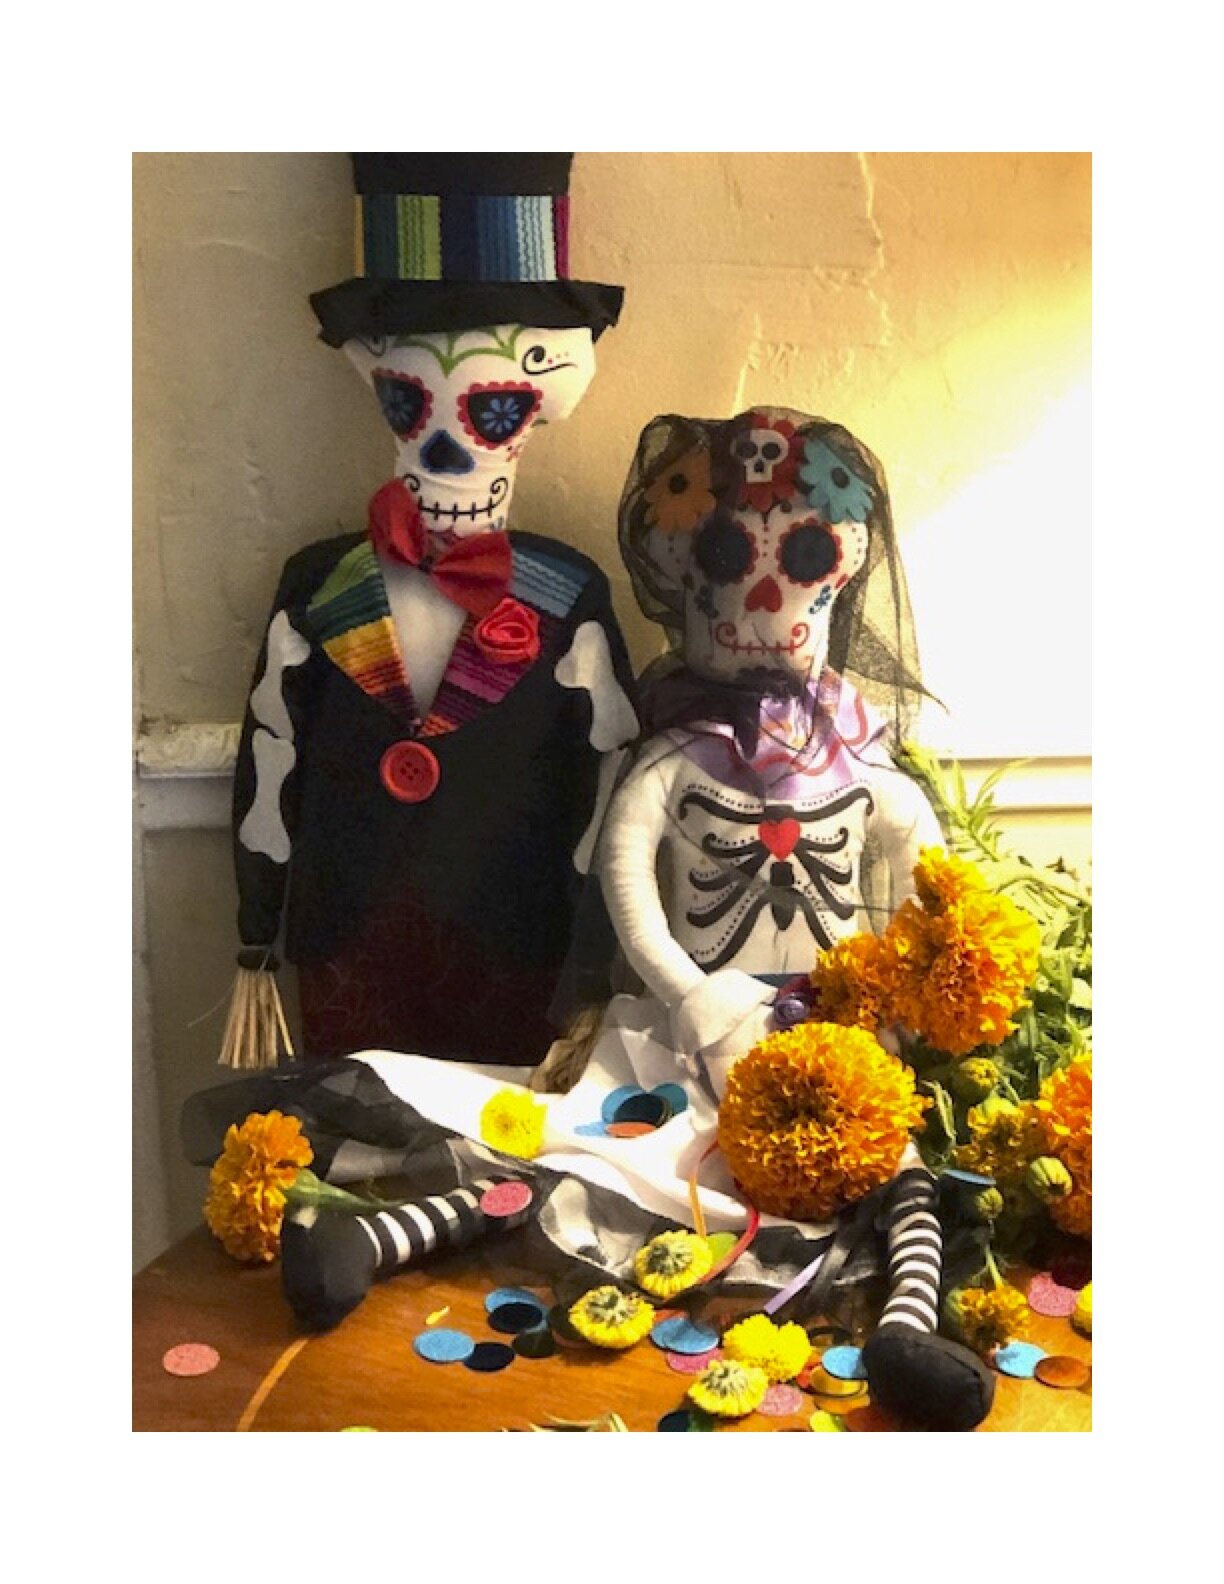 In Mexican culture, death is viewed as a natural part of the human cycle. Mexicans view it not as a day of sadness but as a day of celebration because their loved ones awake and celebrate with them. (Wikipedia)